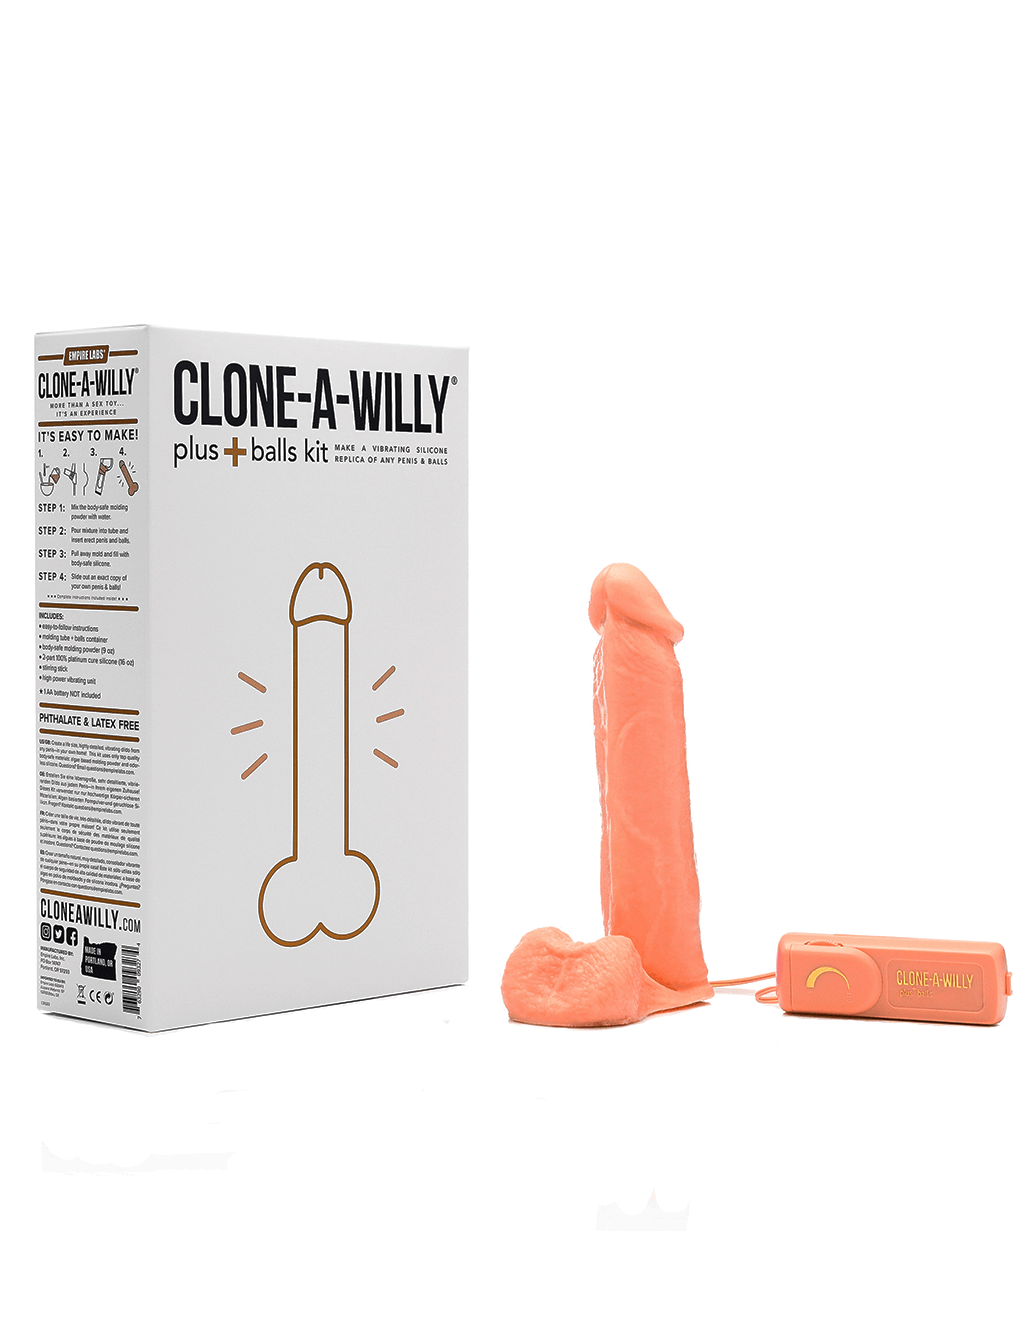 Clone-A-Willy Plus+ Balls Dildo Molding Kit by HUSTLER® photo pic photo